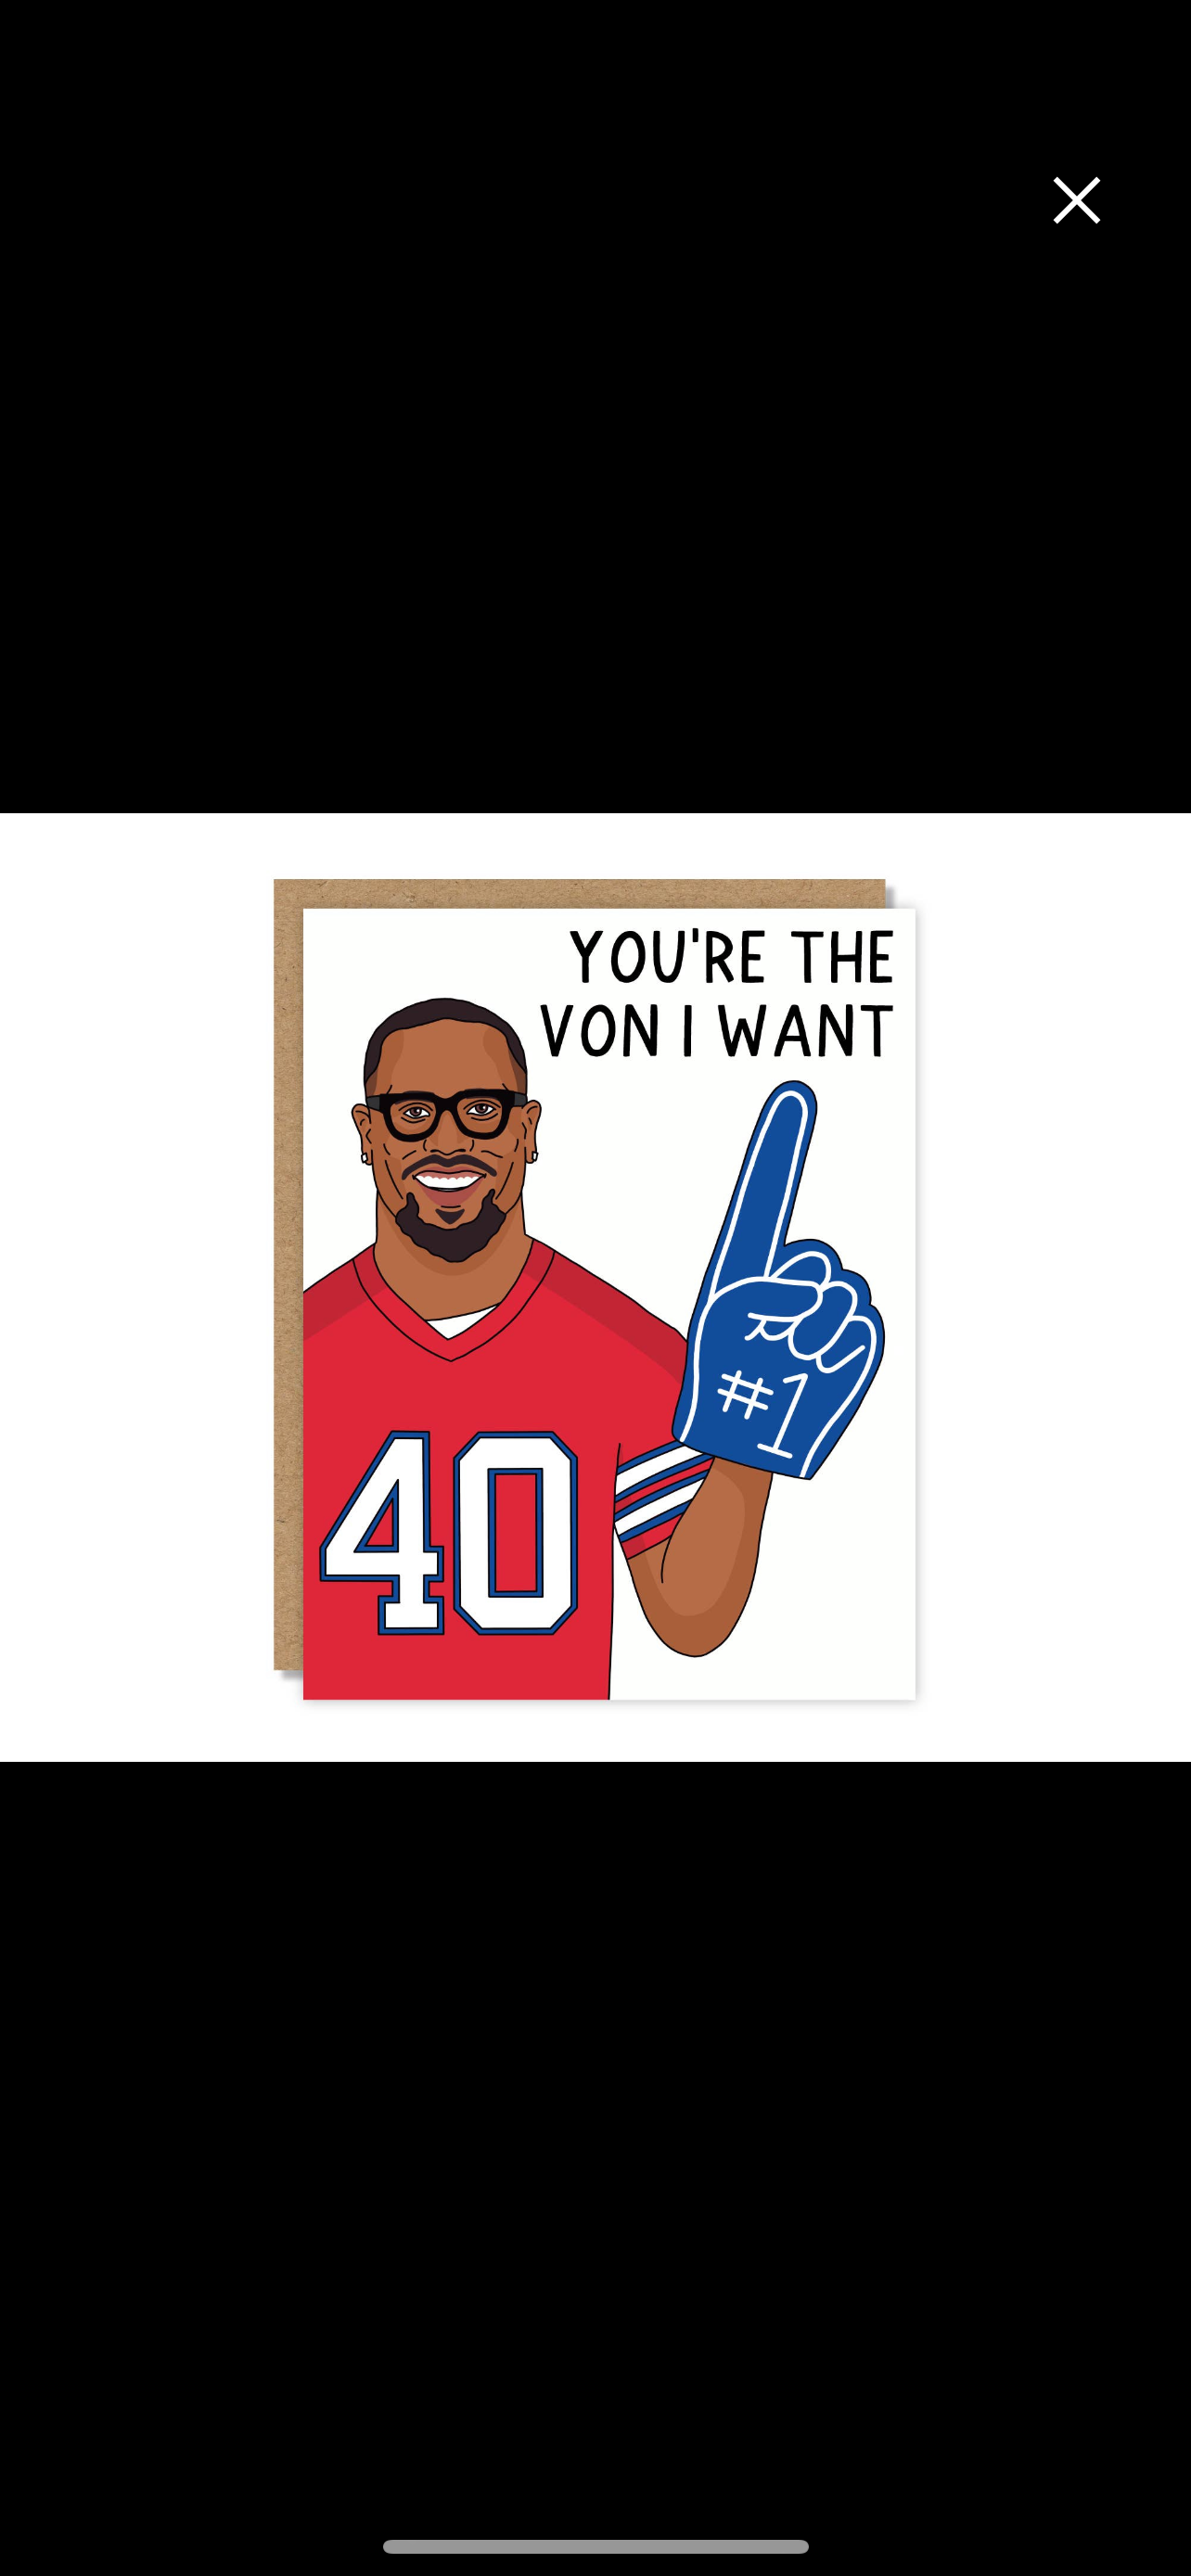 You’re the Von I want